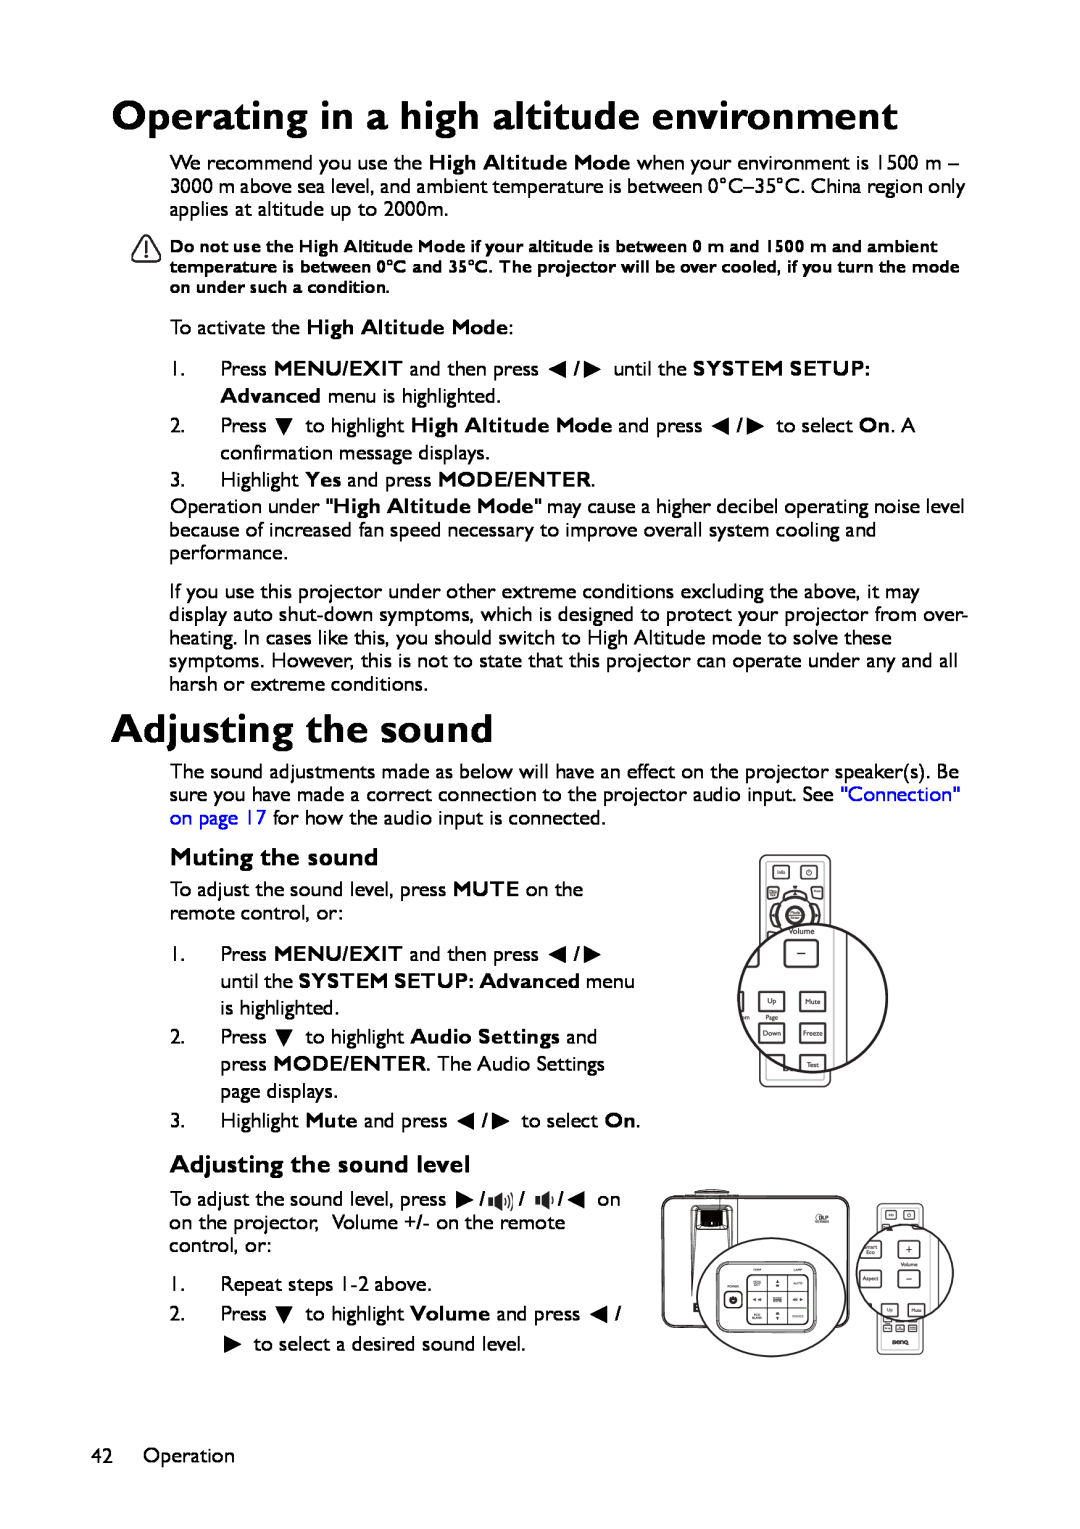 BenQ MX661 user manual Operating in a high altitude environment, Muting the sound, Adjusting the sound level 